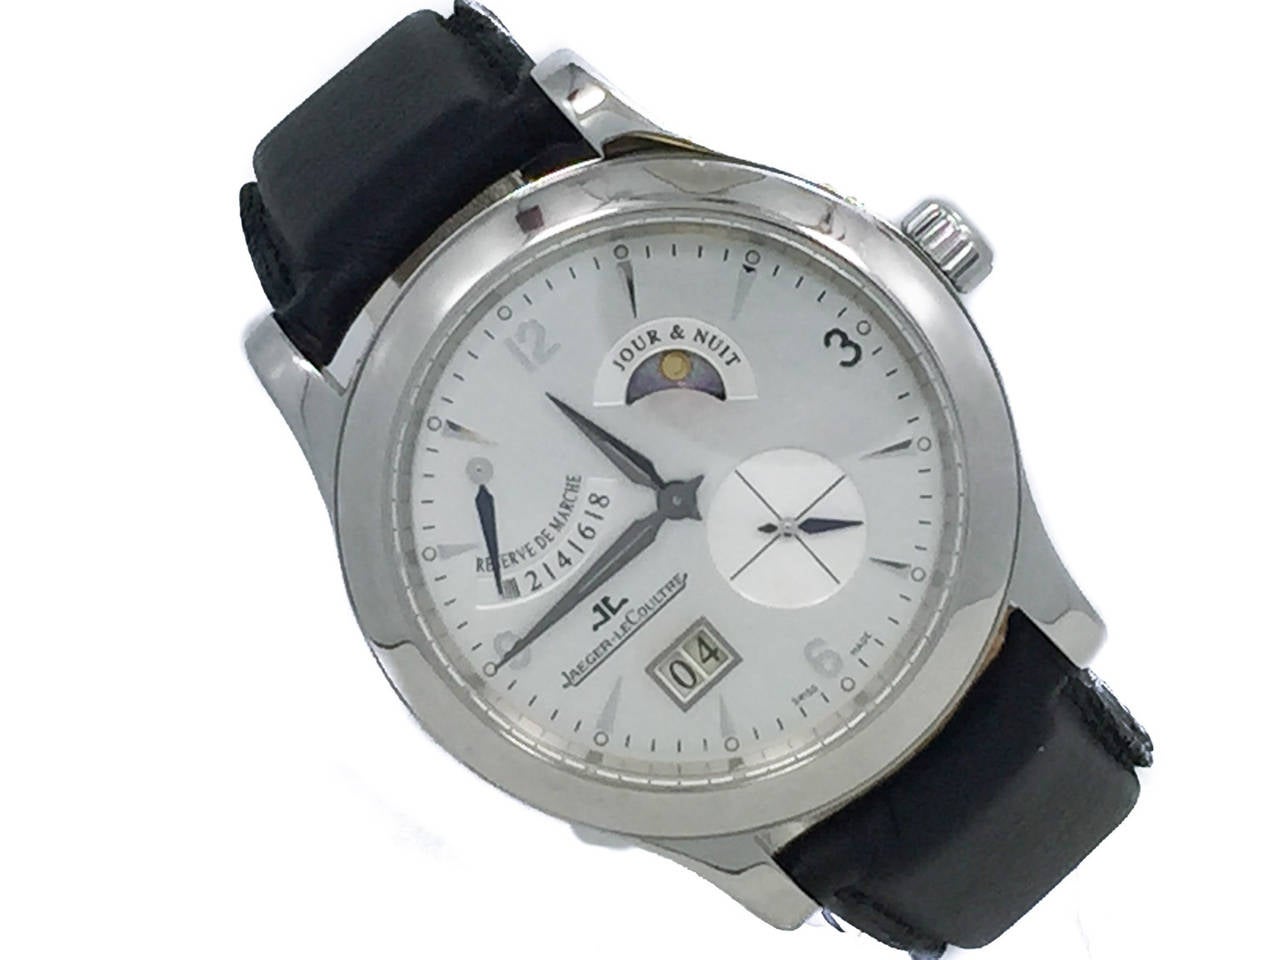 Mens Jaeger LeCoultre Master 8 Day In Stainless Steel. The Watch is in Great Condition & All Functions Work Great, Movement is Operated by Manual Mechanical Winding. The Watch is on a Jaeger Strap & Buckle. Included is a Jaeger Box & Jaeger Cert.